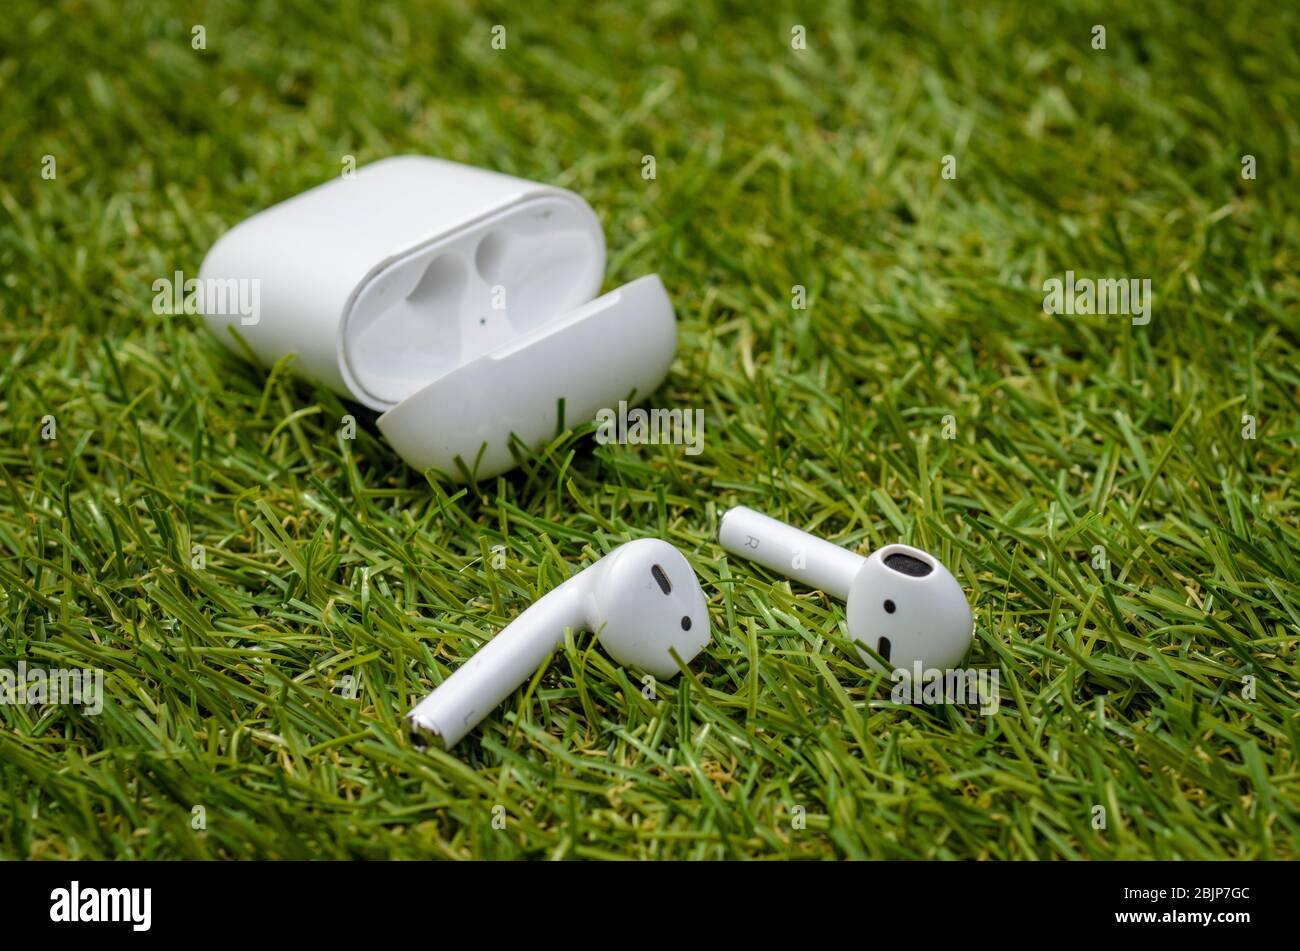 1,000+ Apple Earpods Stock Photos, Pictures & Royalty-Free Images